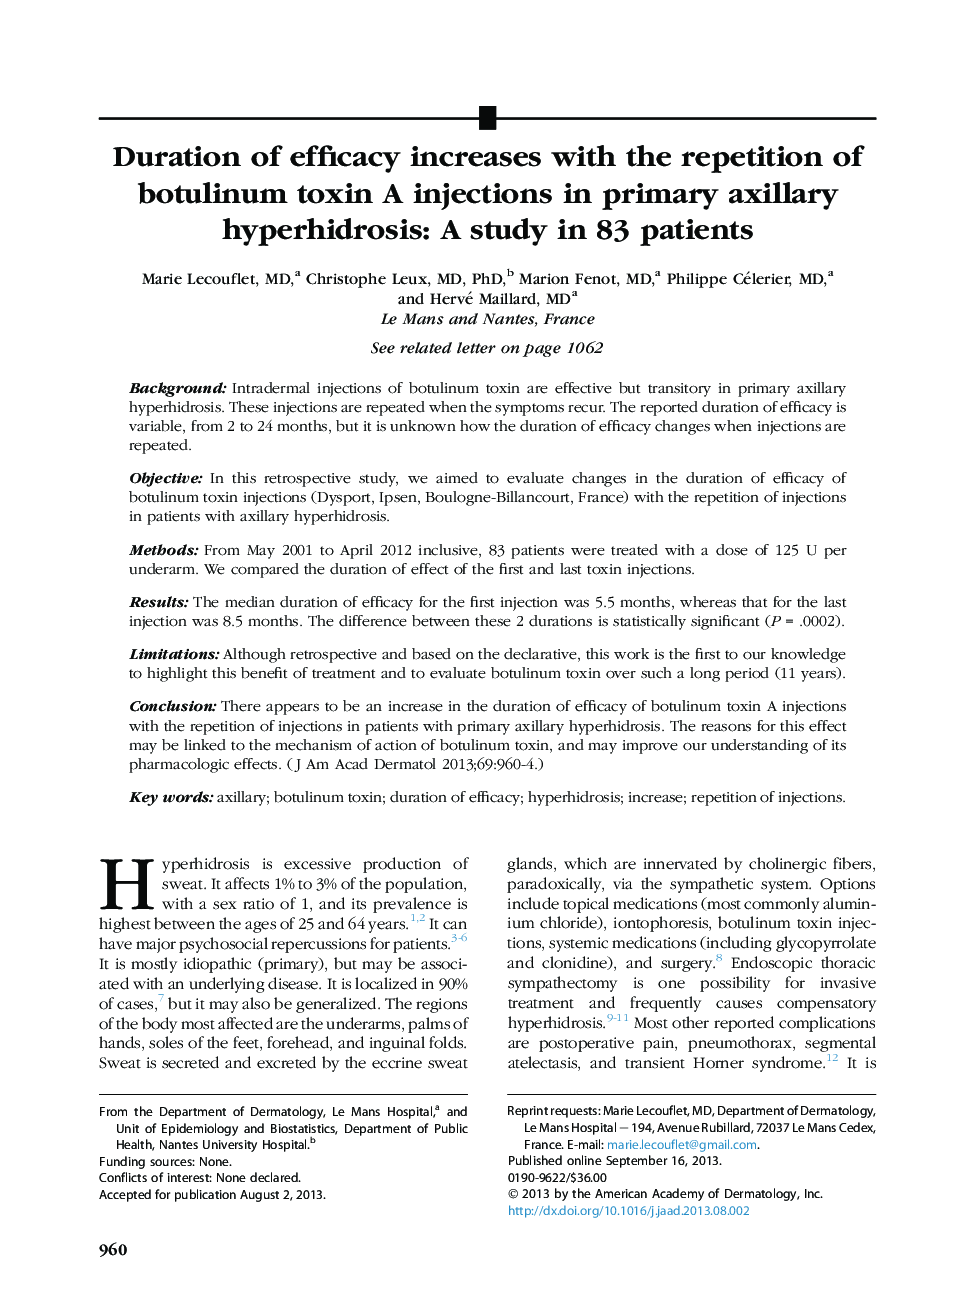 Duration of efficacy increases with the repetition of botulinum toxin A injections in primary axillary hyperhidrosis: A study in 83 patients 